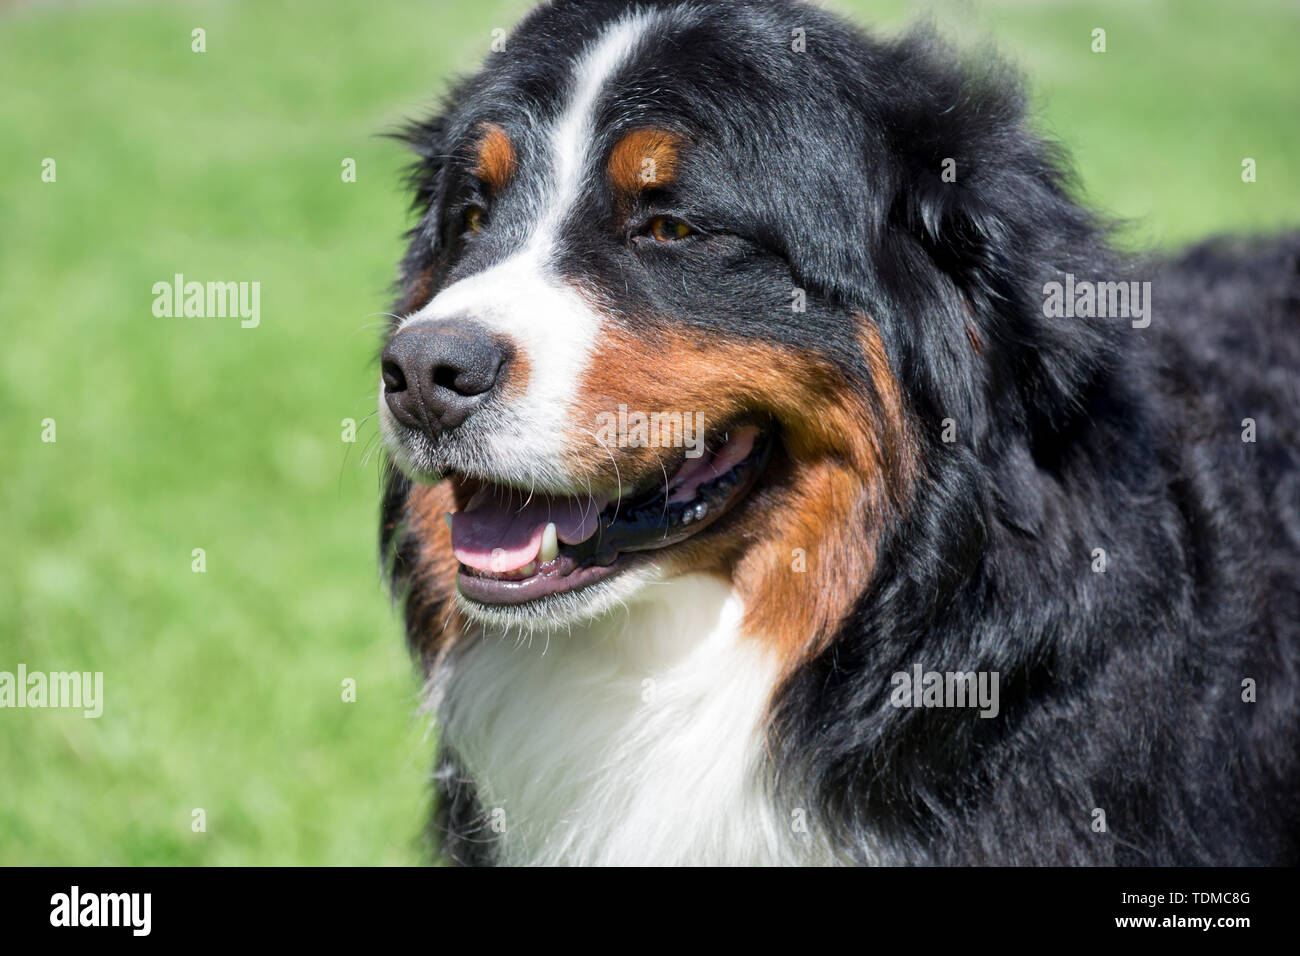 Cute bernese mountain dog puppy is standing on a green meadow. Berner sennenhund or bernese cattle dog. Pet animals. Stock Photo